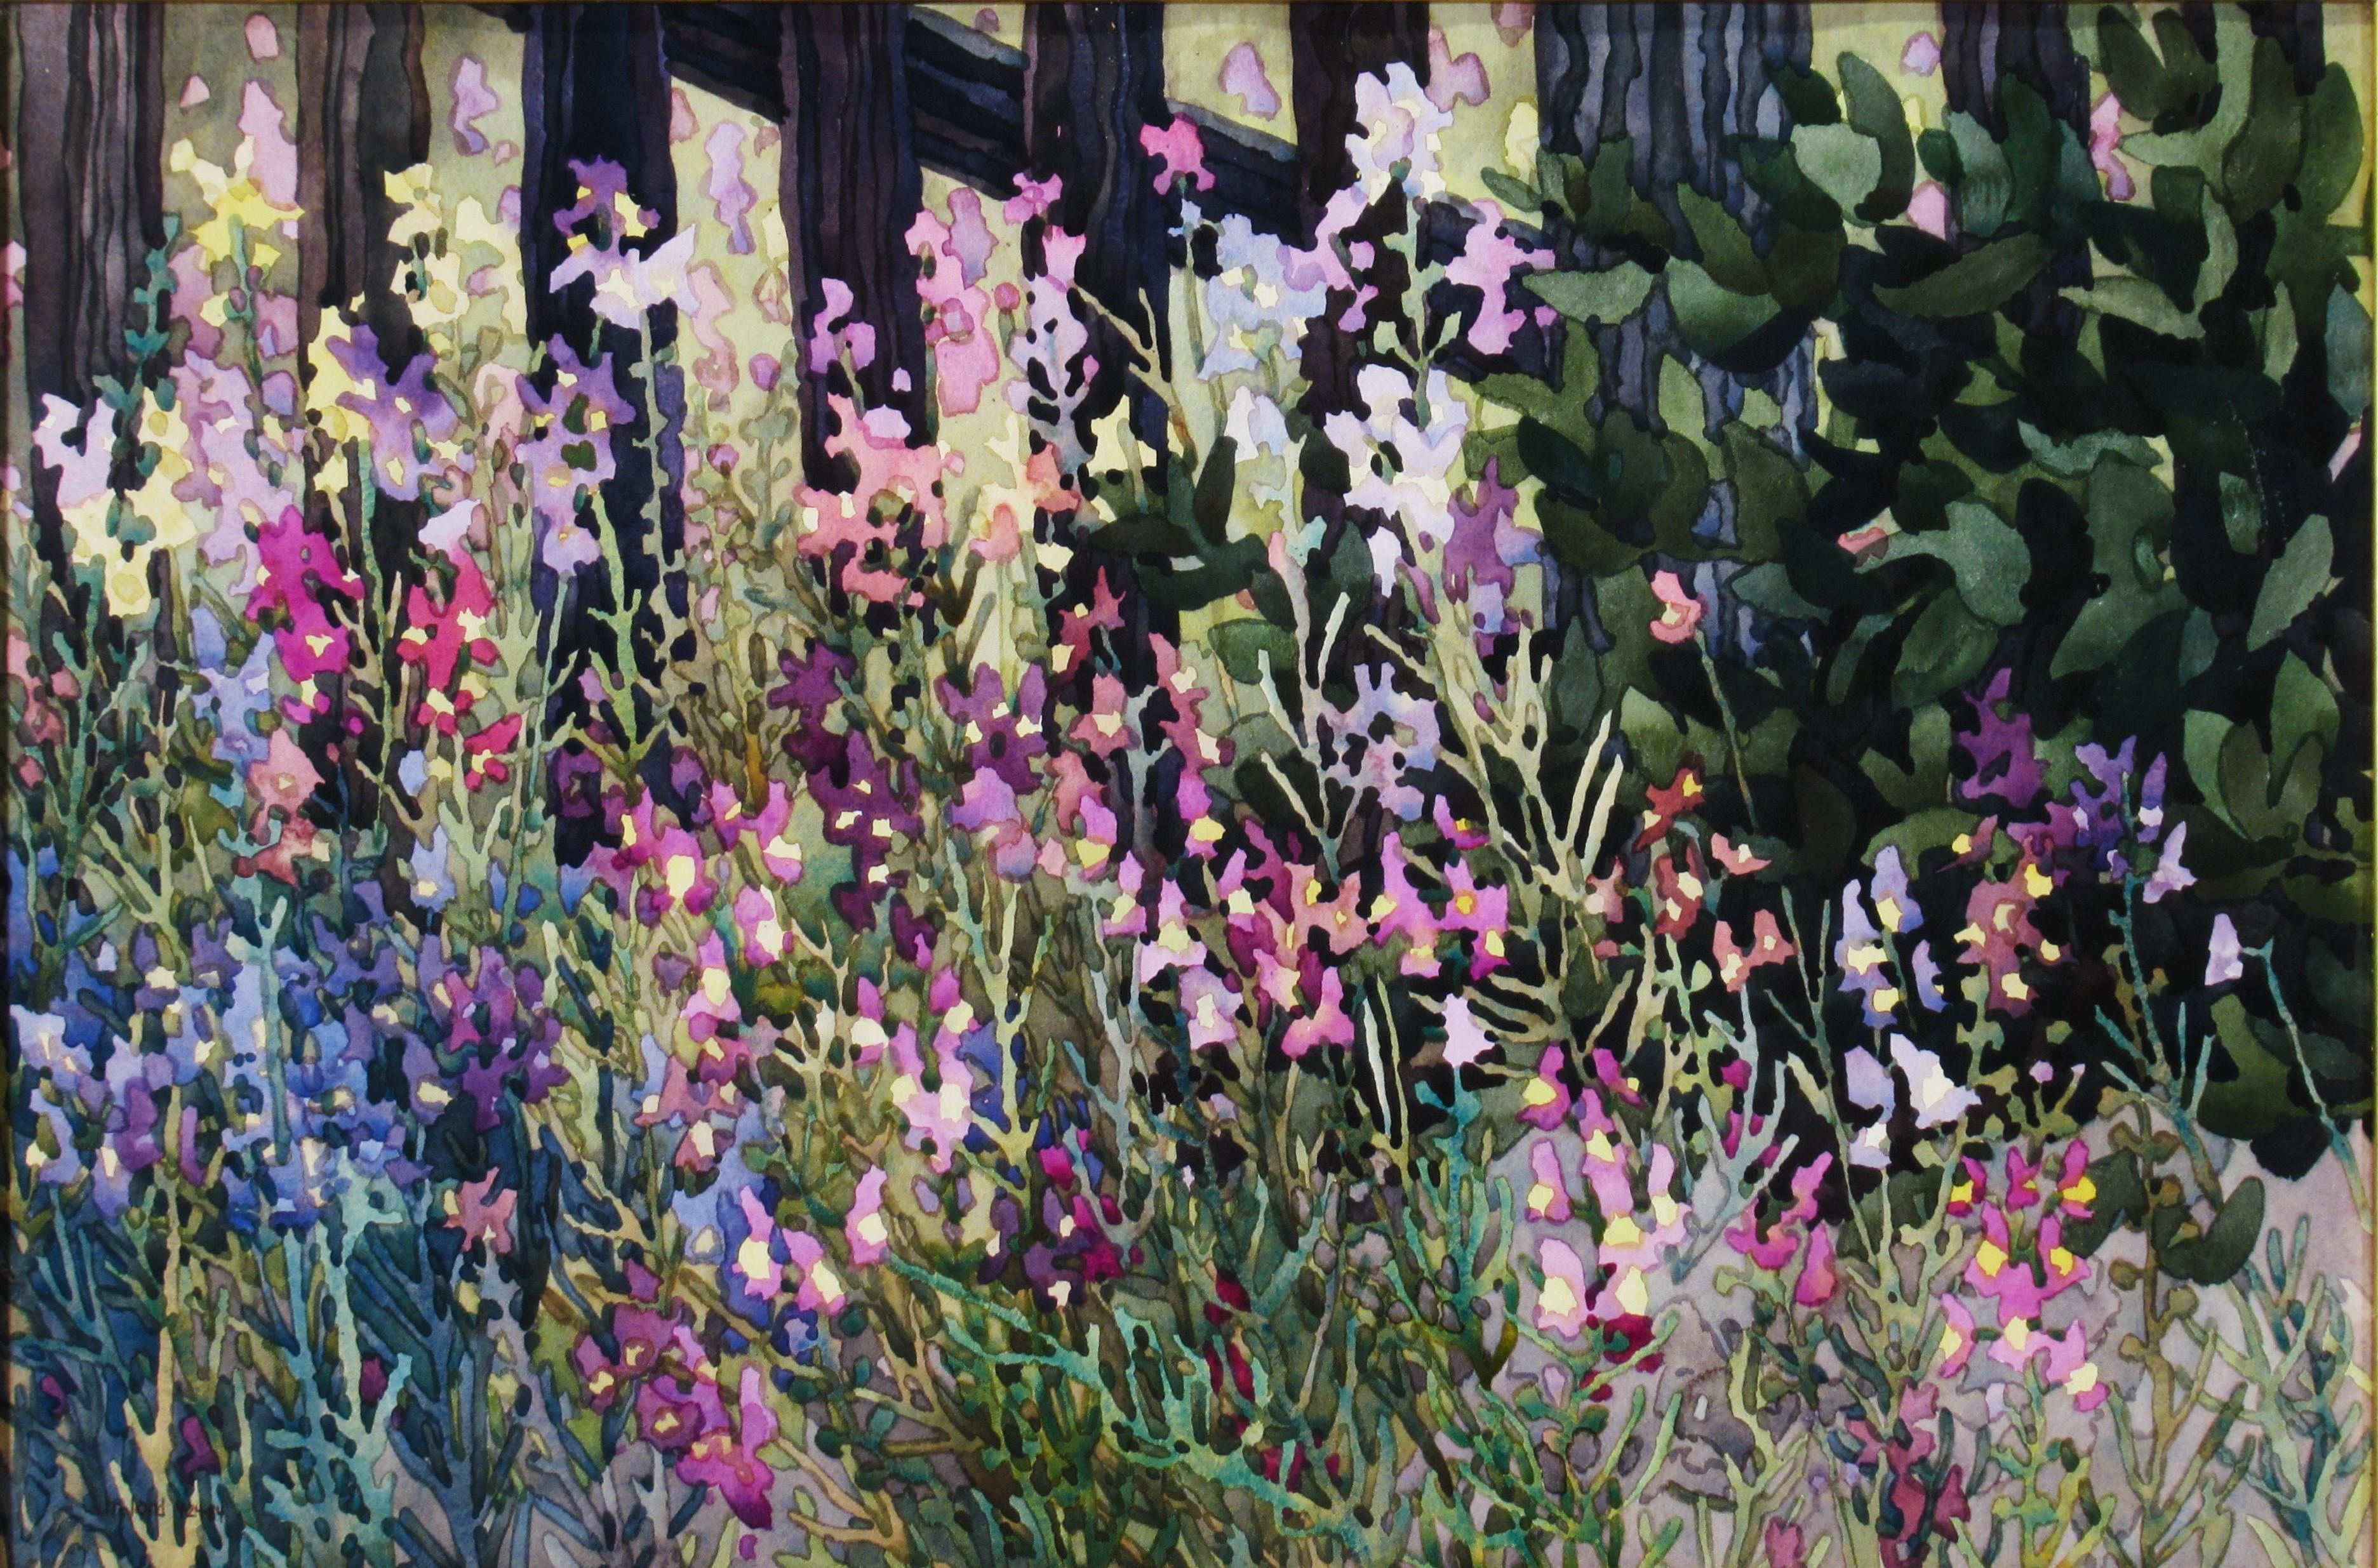 Garden with Fence - Art by Carolyn Marie Lord